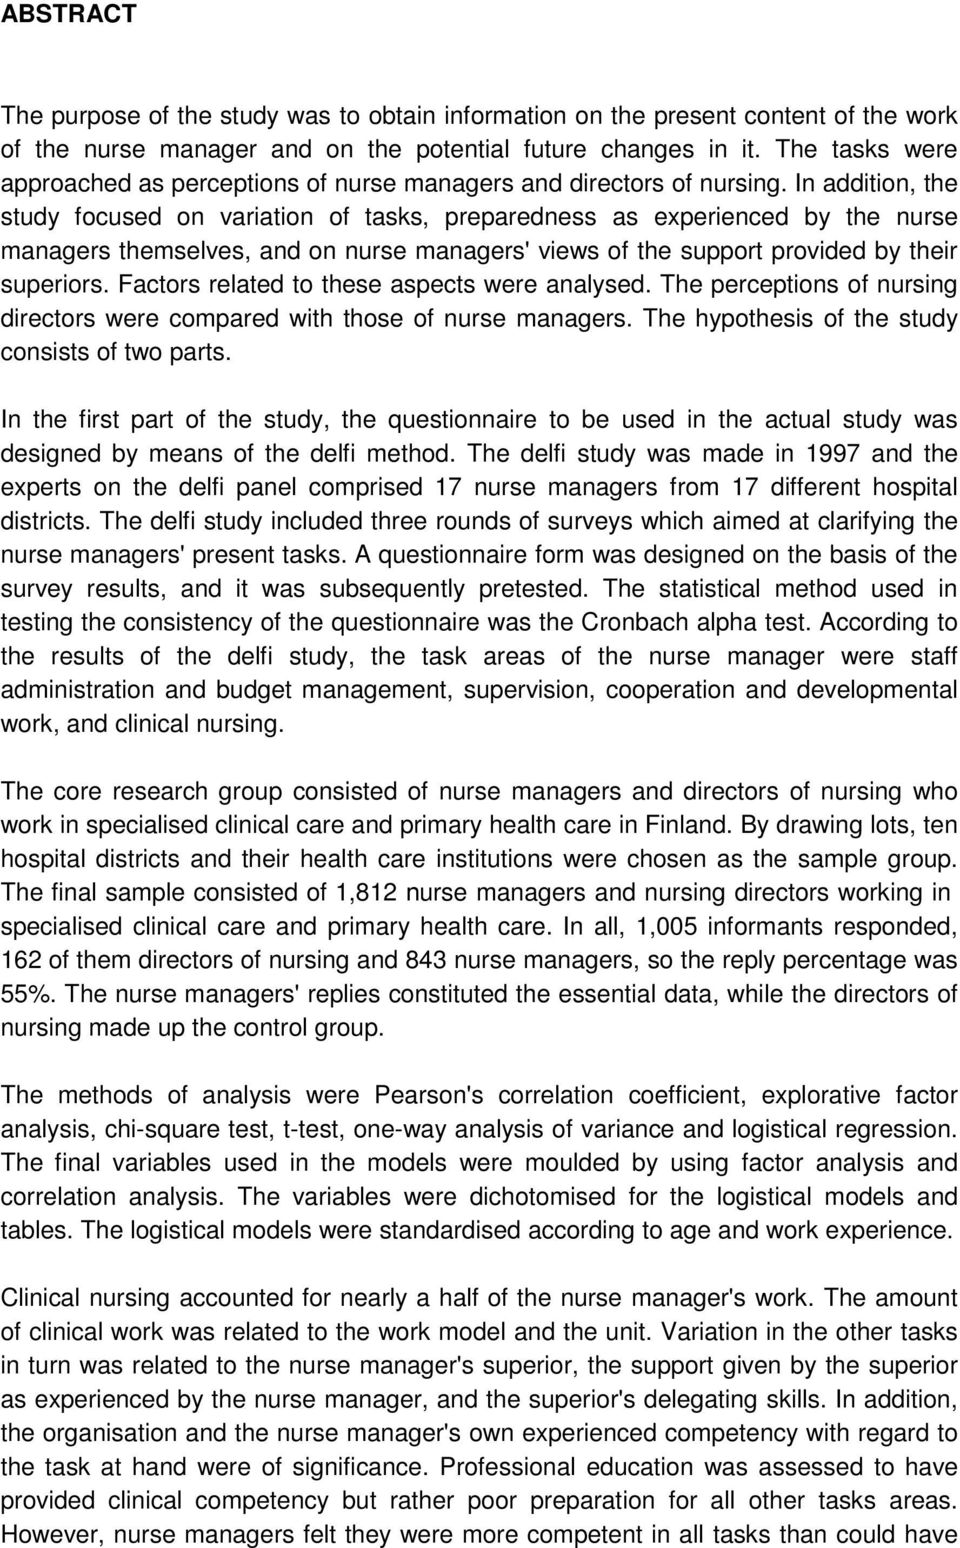 In addition, the study focused on variation of tasks, preparedness as experienced by the nurse managers themselves, and on nurse managers' views of the support provided by their superiors.